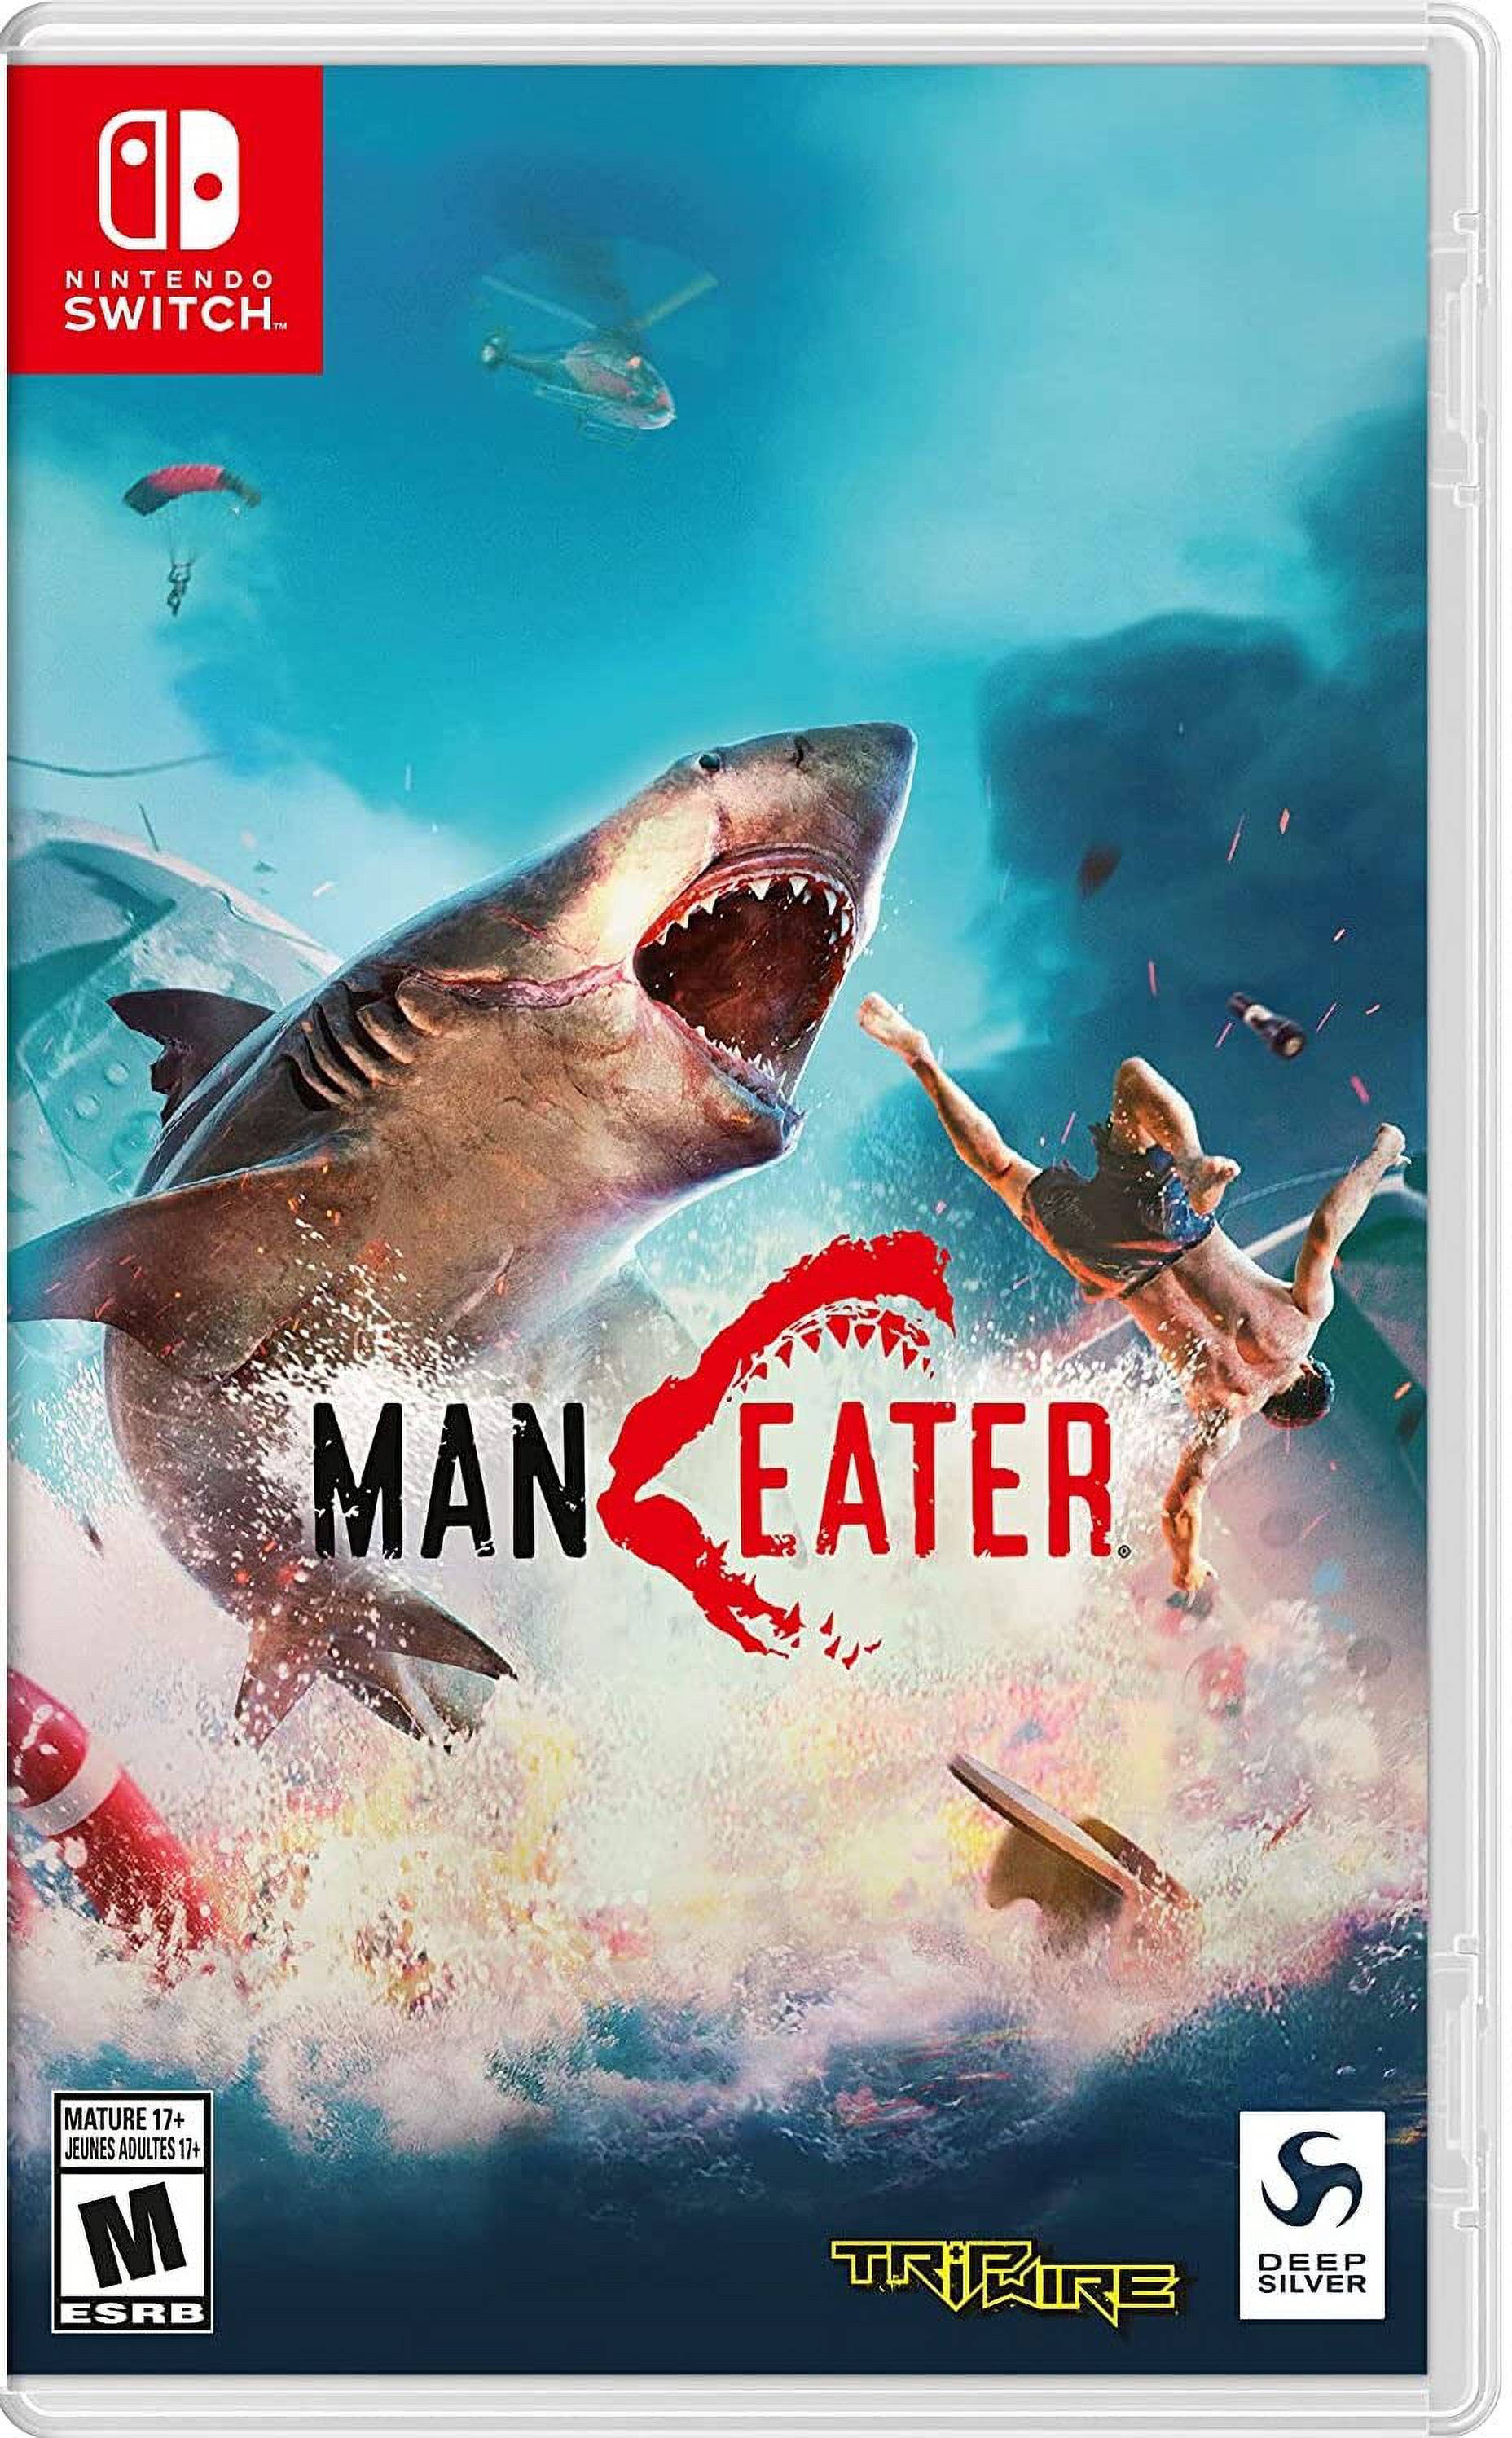 Maneater, Deep Silver, Nintendo Switch [Physical], 816819017524 - image 1 of 7